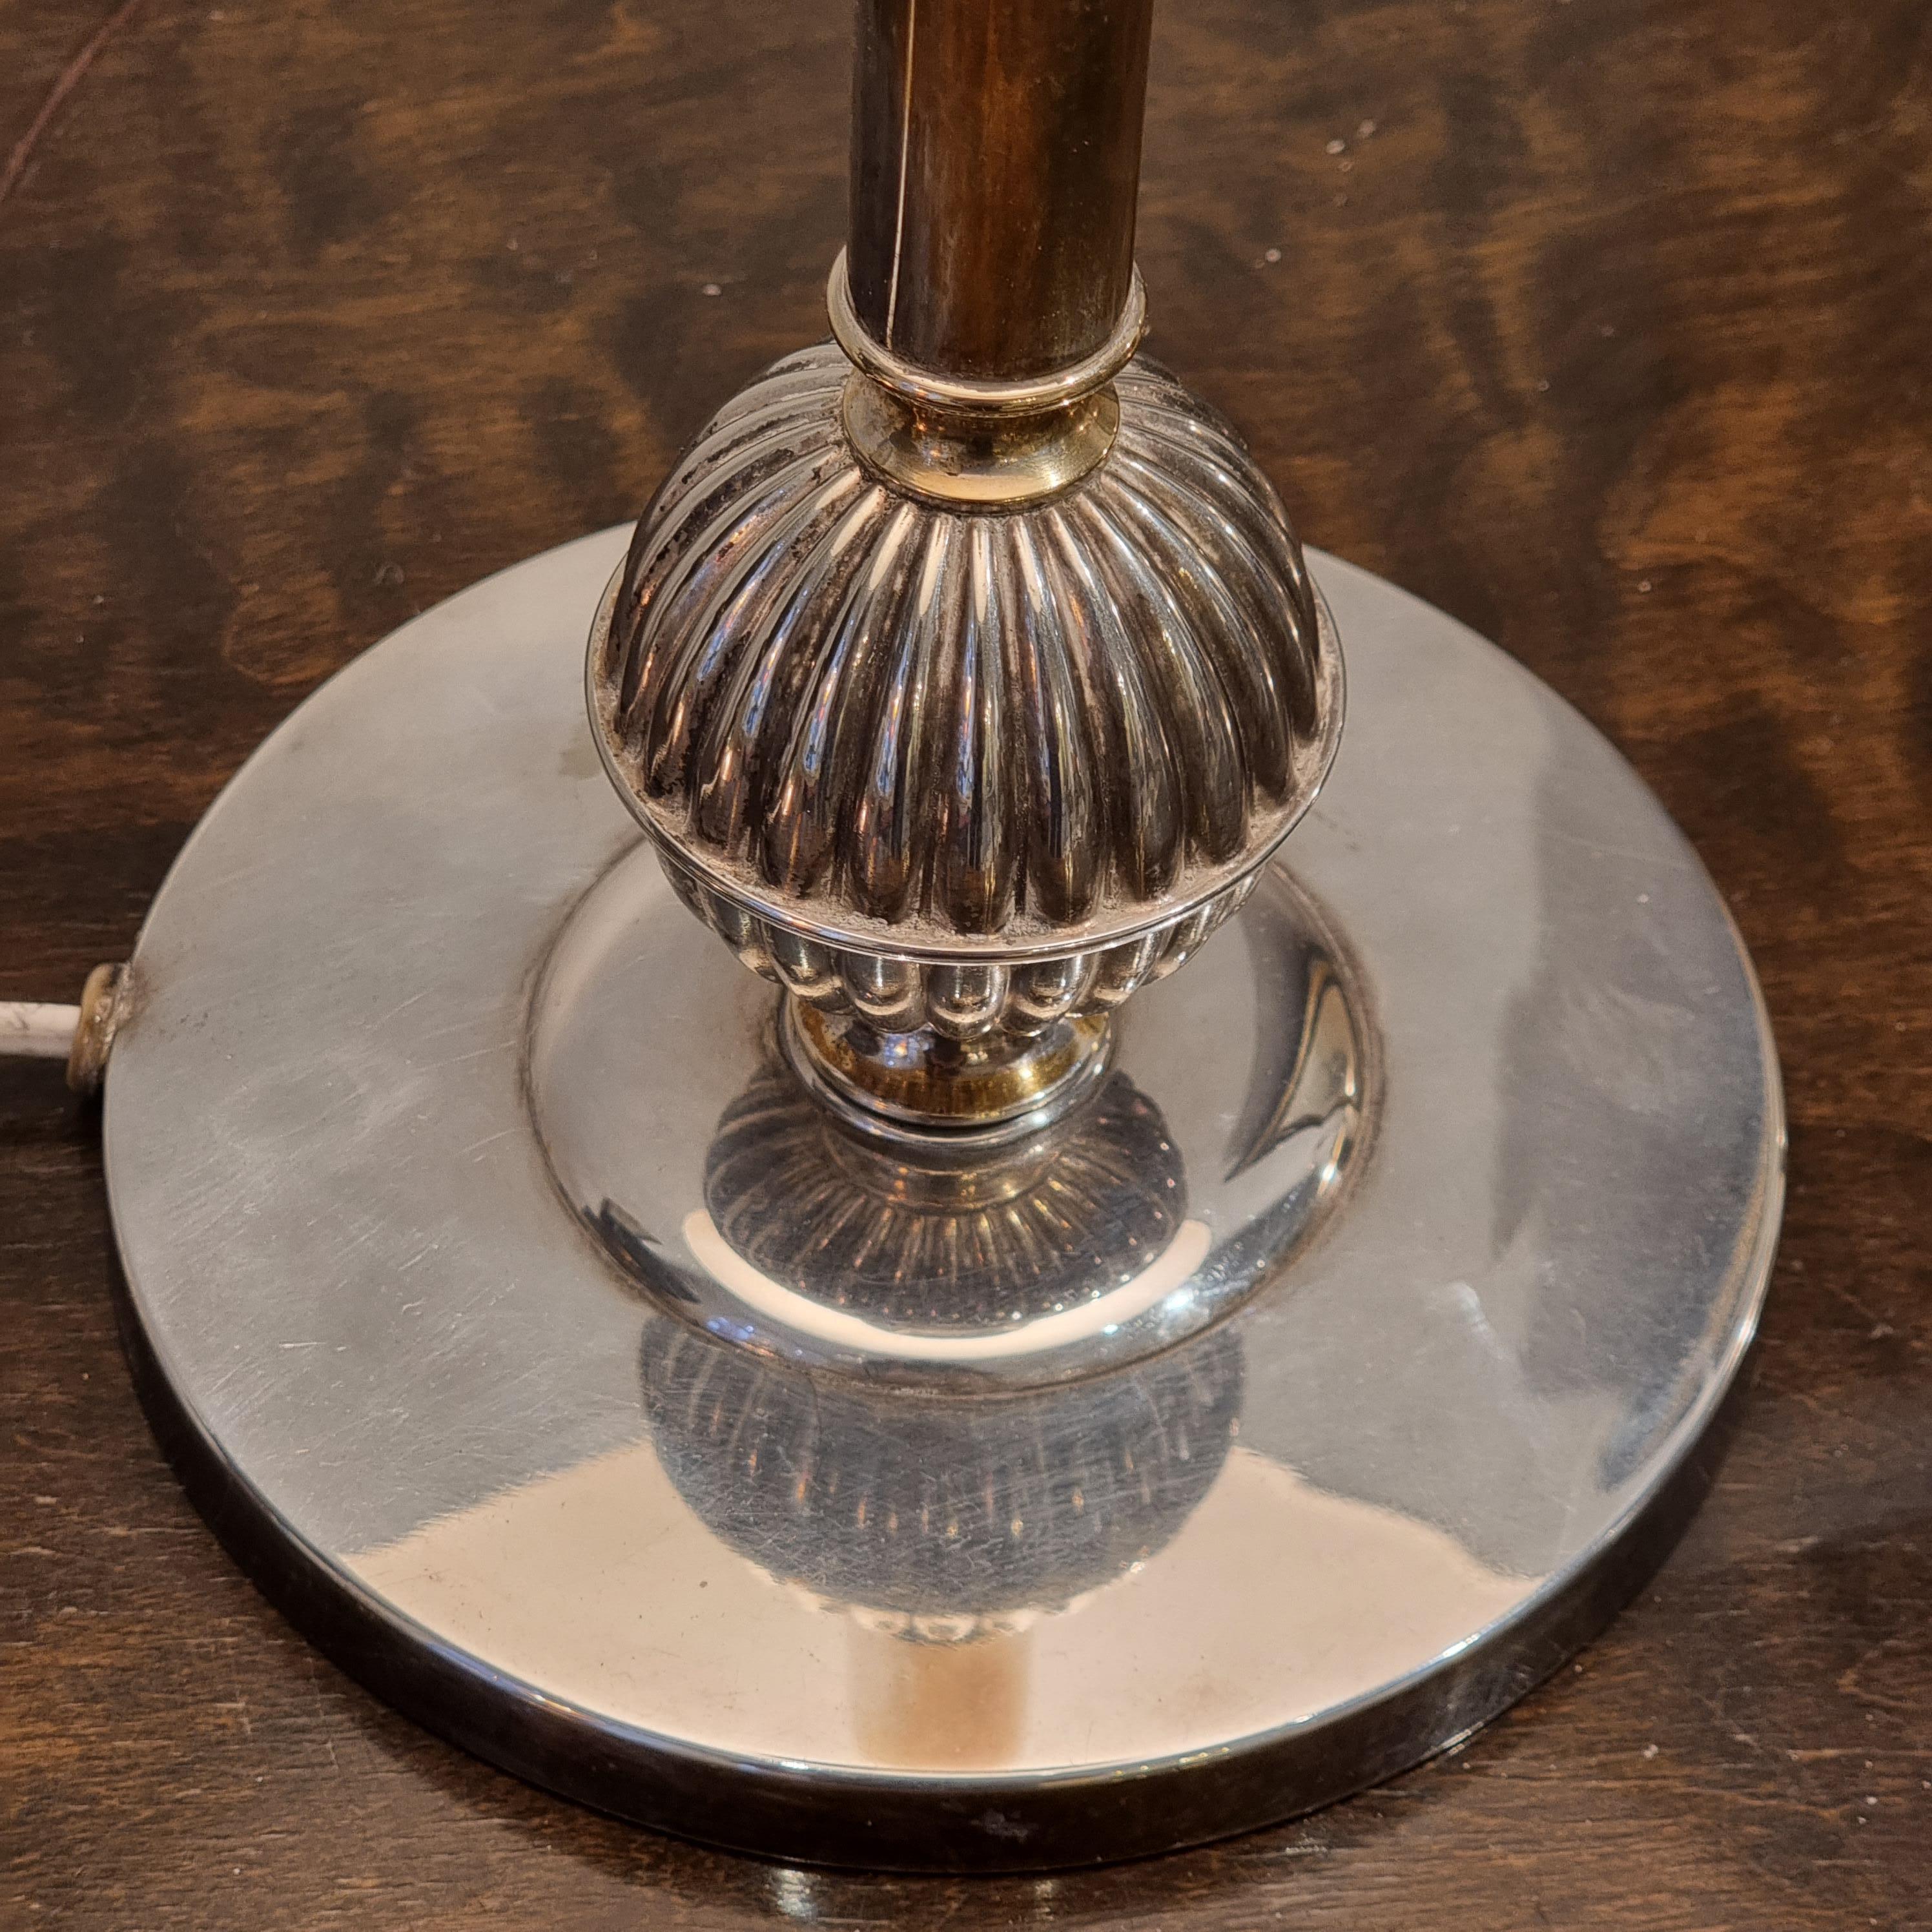 Beautiful example of Swedish grace beauty, a silver plate table lap with subtle elegance. Timeless design by Elis Bergh for court jeweler CG Hallberg, Sweden 1920/30s. Marked: CG Hallberg. 

Sold excl. shade.

Re-wired following swedish standard, we